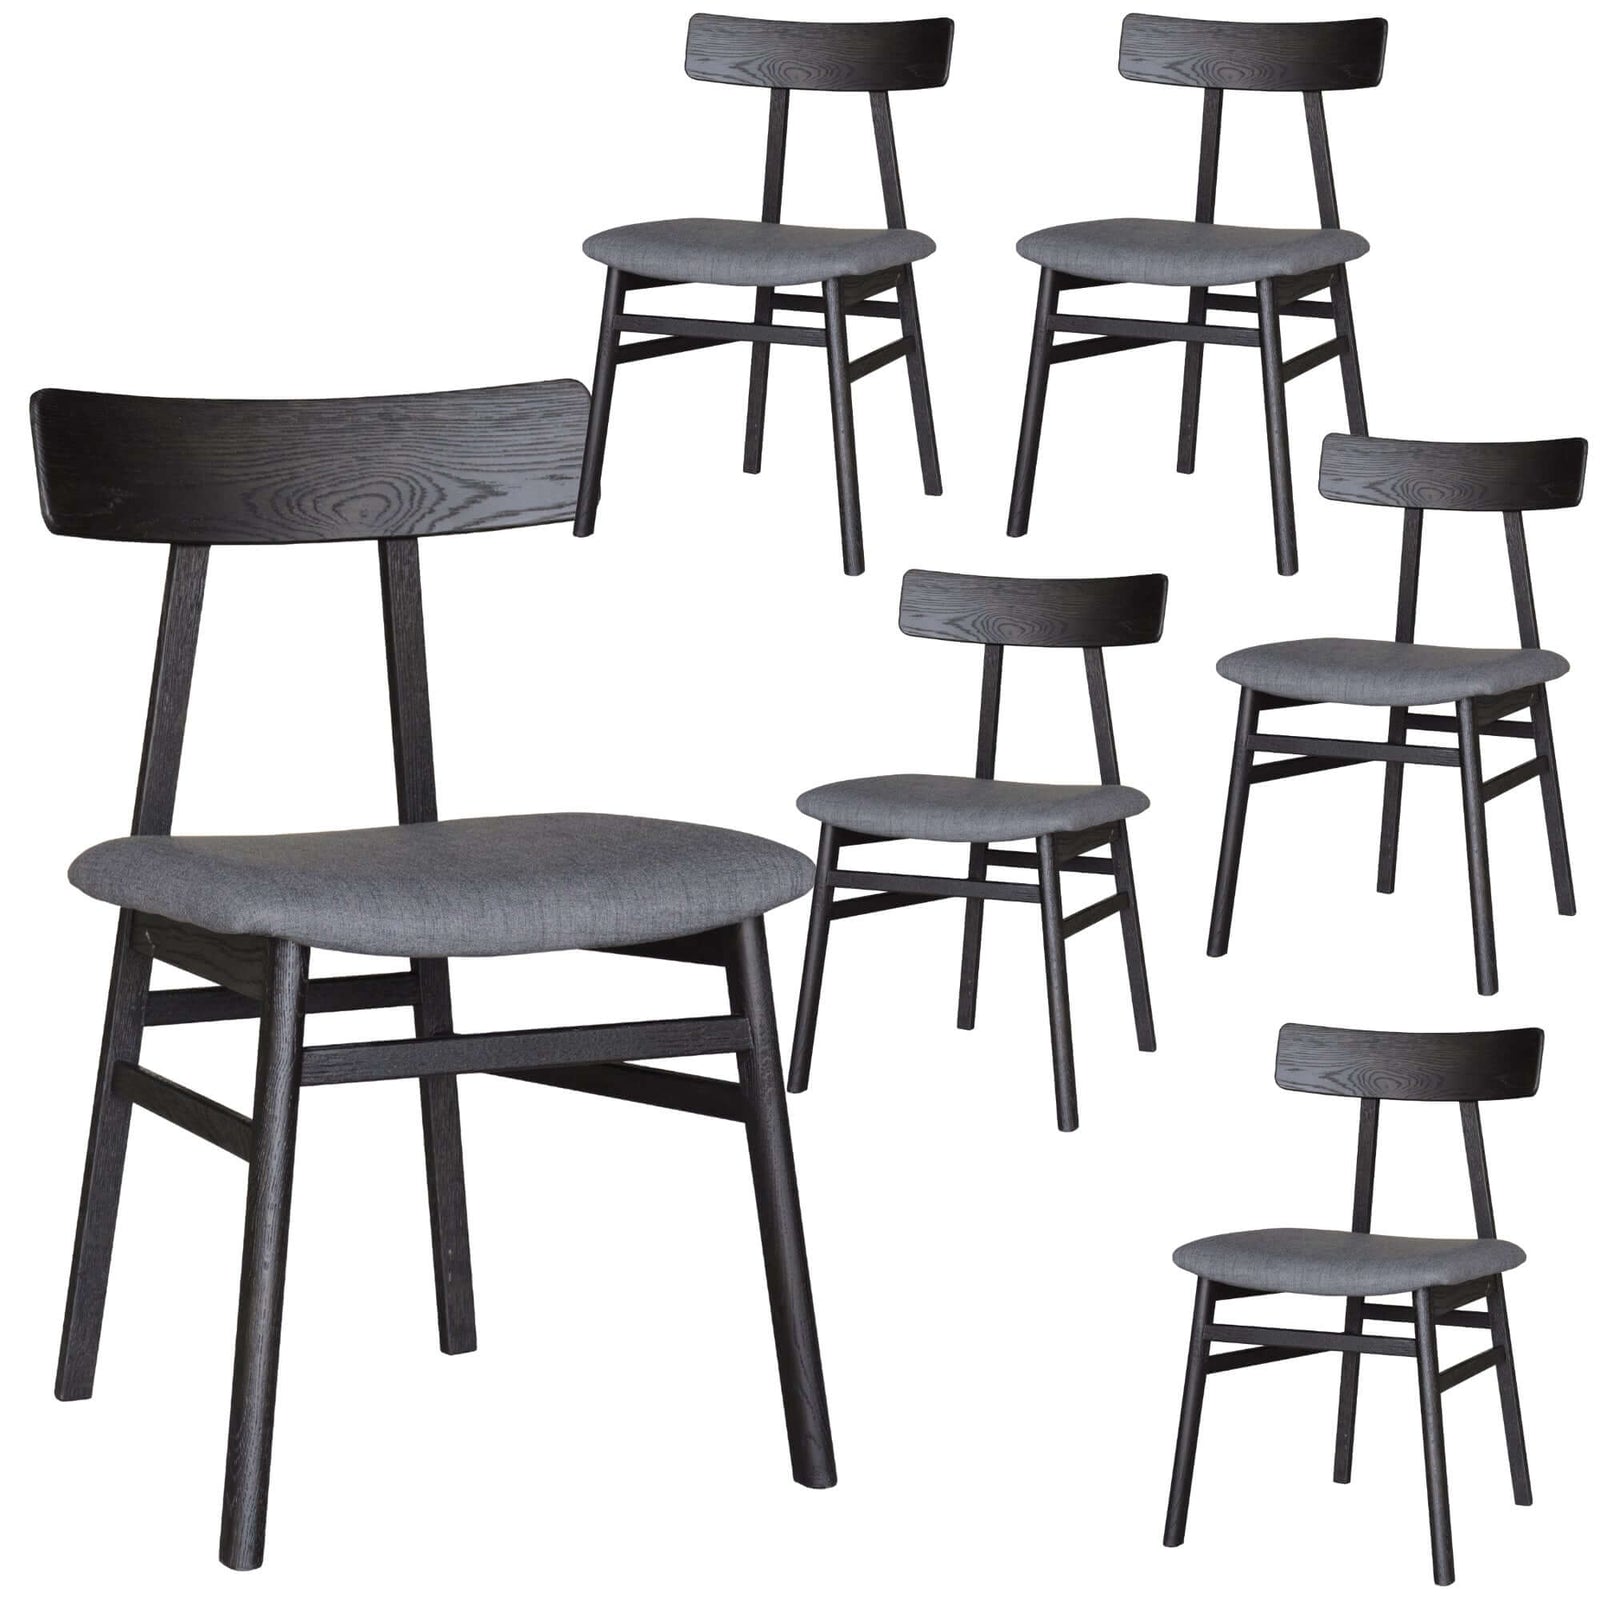 Claire Dining Chair Set of 6 Solid Oak Wood Fabric Seat Furniture - Black-Upinteriors